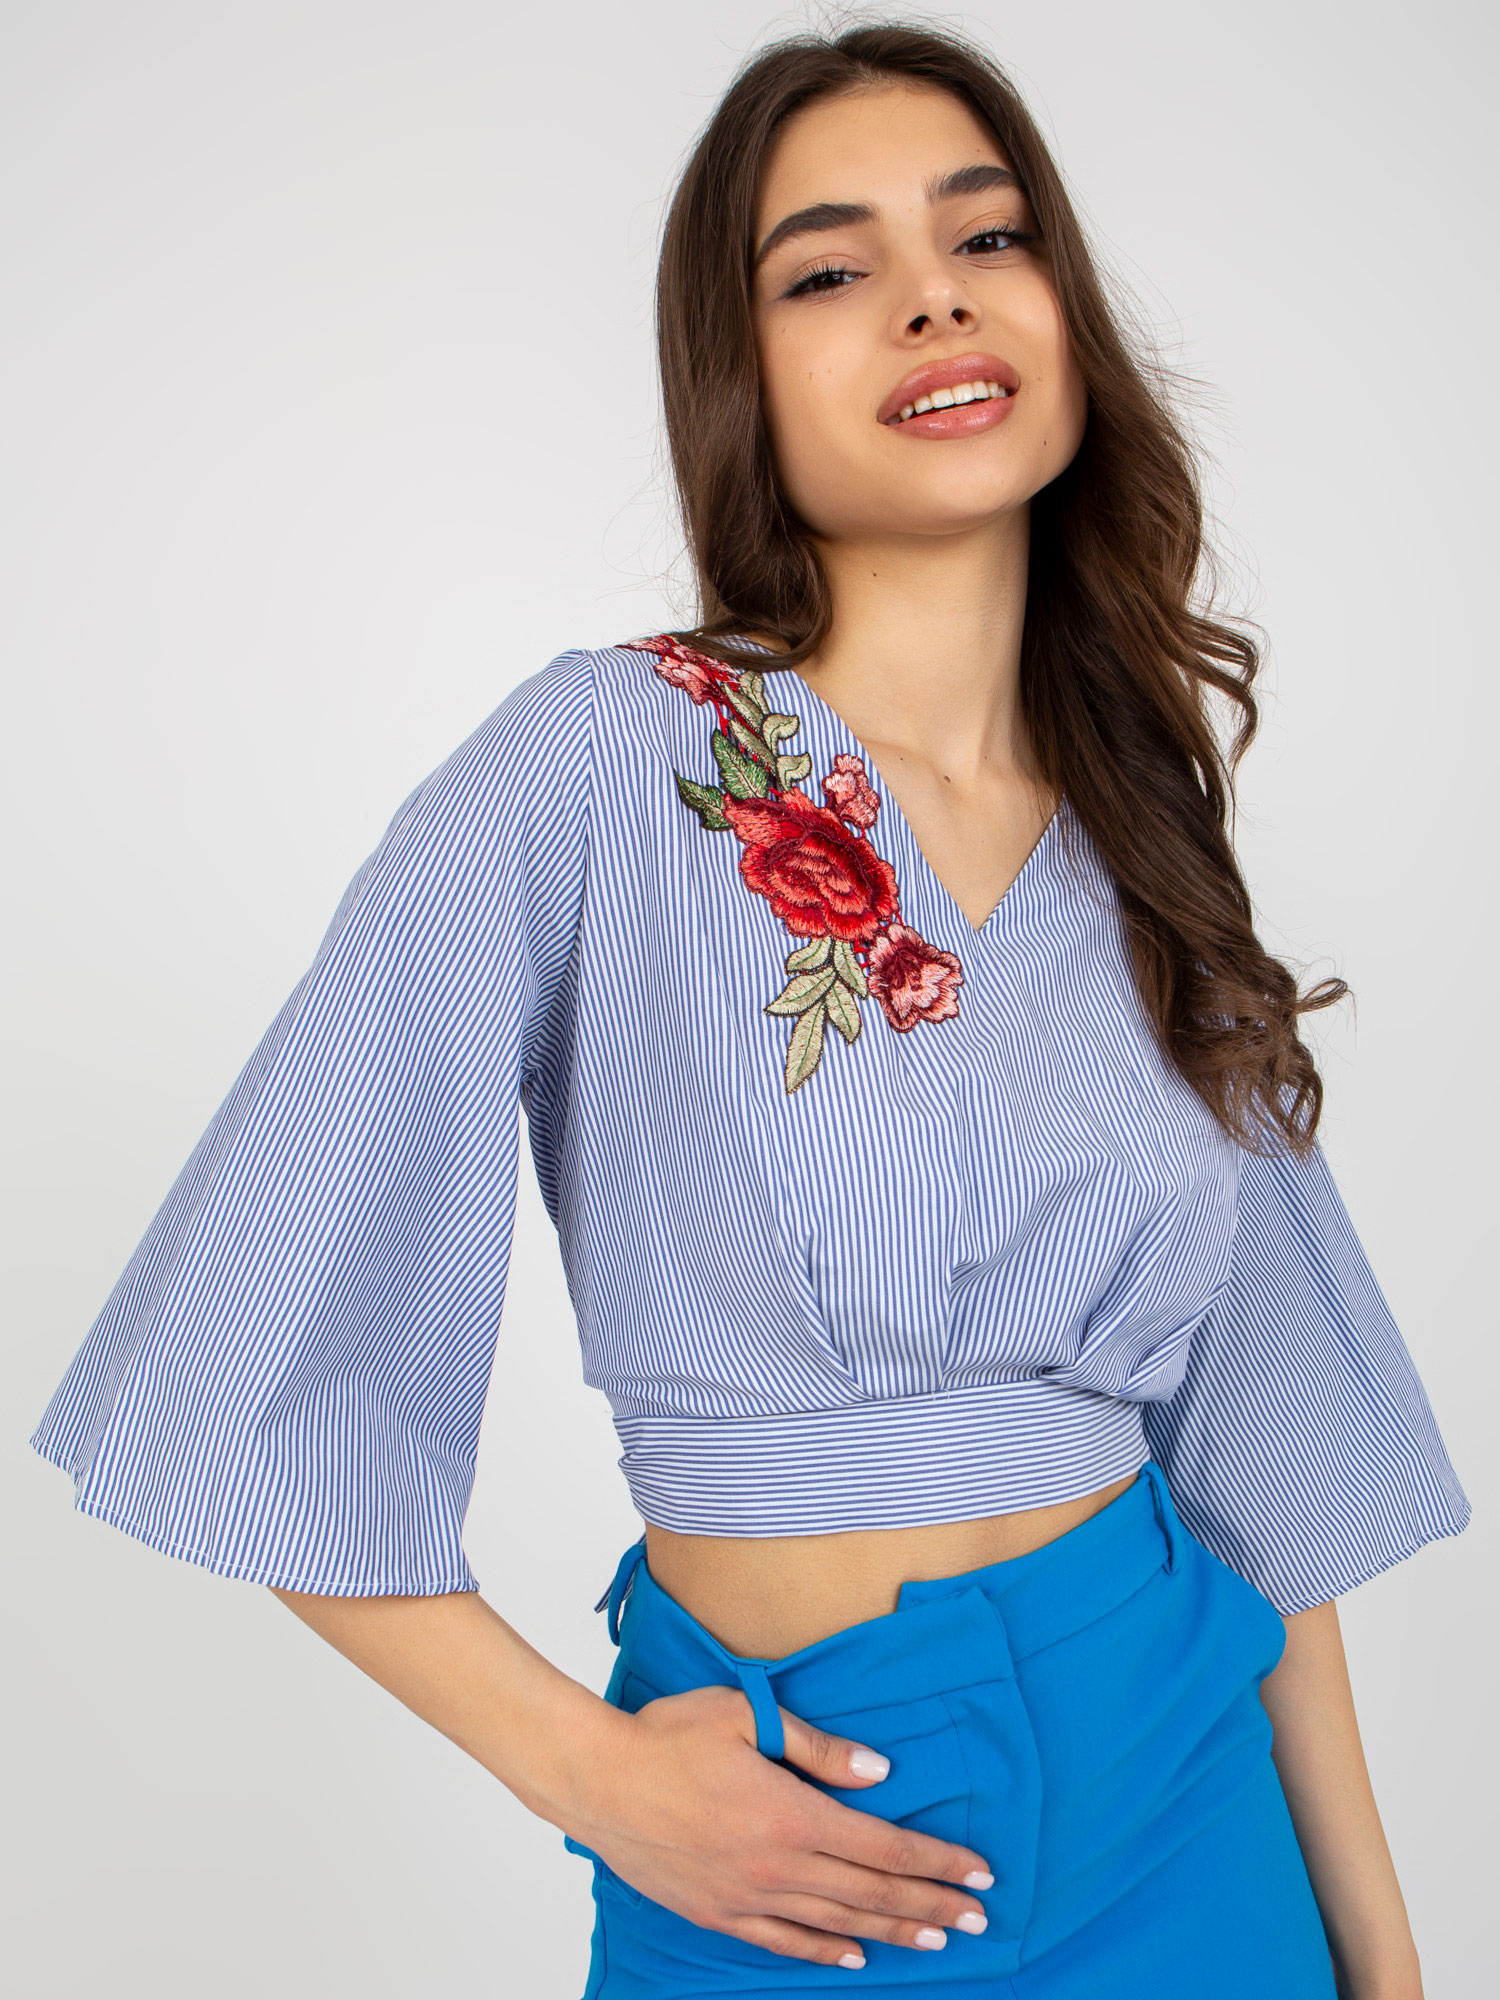 Women's formal blouse with embroidery - blue